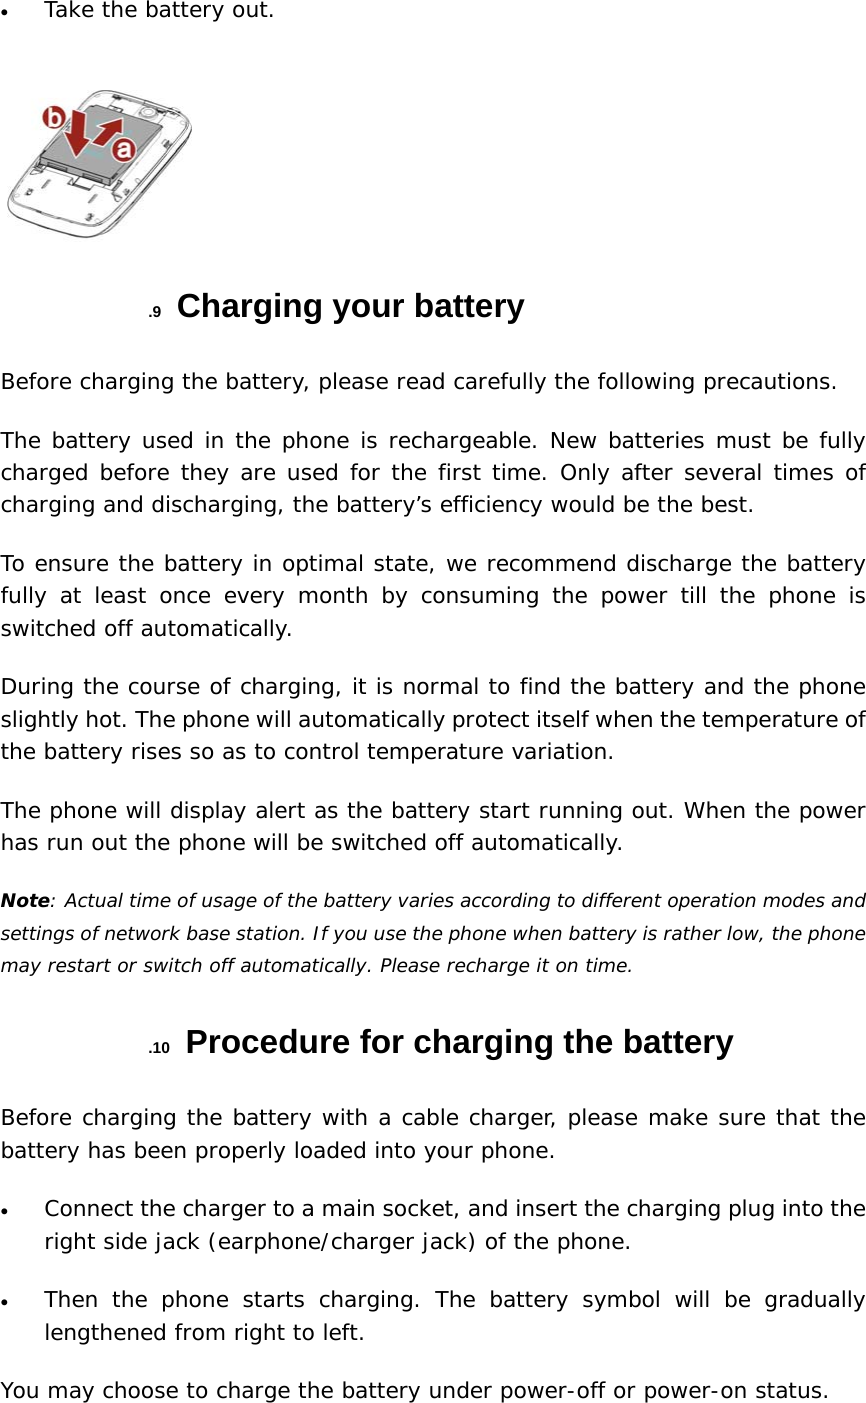 • Take the battery out.  .9  Charging your battery Before charging the battery, please read carefully the following precautions.  The battery used in the phone is rechargeable. New batteries must be fully charged before they are used for the first time. Only after several times of charging and discharging, the battery’s efficiency would be the best. To ensure the battery in optimal state, we recommend discharge the battery fully at least once every month by consuming the power till the phone is switched off automatically. During the course of charging, it is normal to find the battery and the phone slightly hot. The phone will automatically protect itself when the temperature of the battery rises so as to control temperature variation. The phone will display alert as the battery start running out. When the power has run out the phone will be switched off automatically. Note: Actual time of usage of the battery varies according to different operation modes and settings of network base station. If you use the phone when battery is rather low, the phone may restart or switch off automatically. Please recharge it on time. .10  Procedure for charging the battery Before charging the battery with a cable charger, please make sure that the battery has been properly loaded into your phone. • Connect the charger to a main socket, and insert the charging plug into the right side jack (earphone/charger jack) of the phone. • Then the phone starts charging. The battery symbol will be gradually lengthened from right to left. You may choose to charge the battery under power-off or power-on status.  